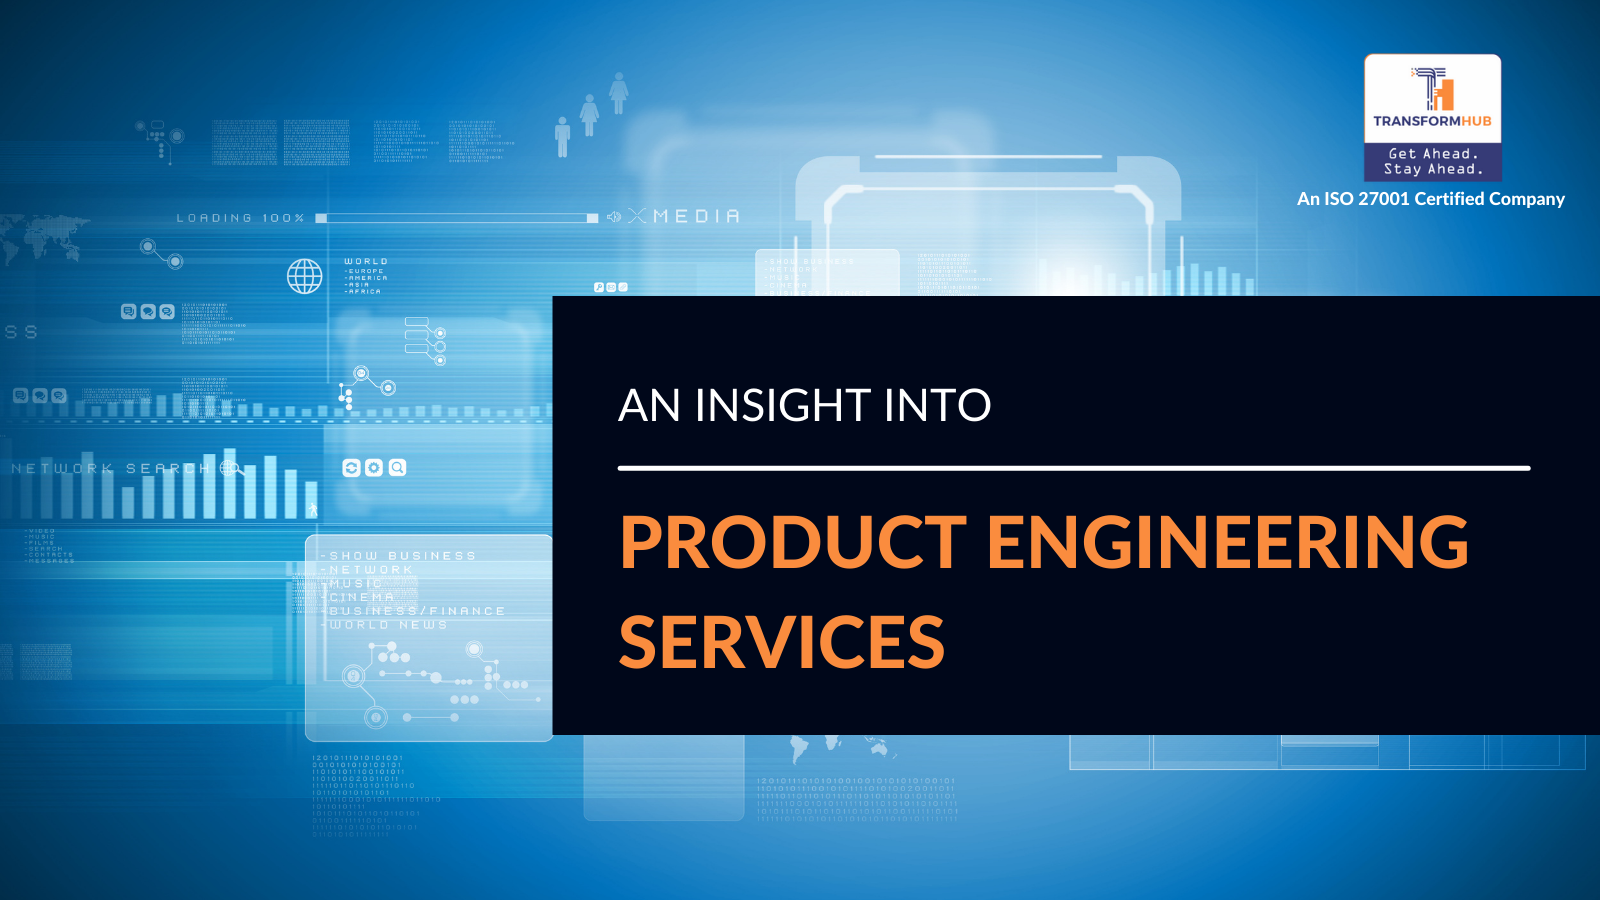 Insight%20into%20PRODUCT%20ENGINEERING%20SERVICES.png